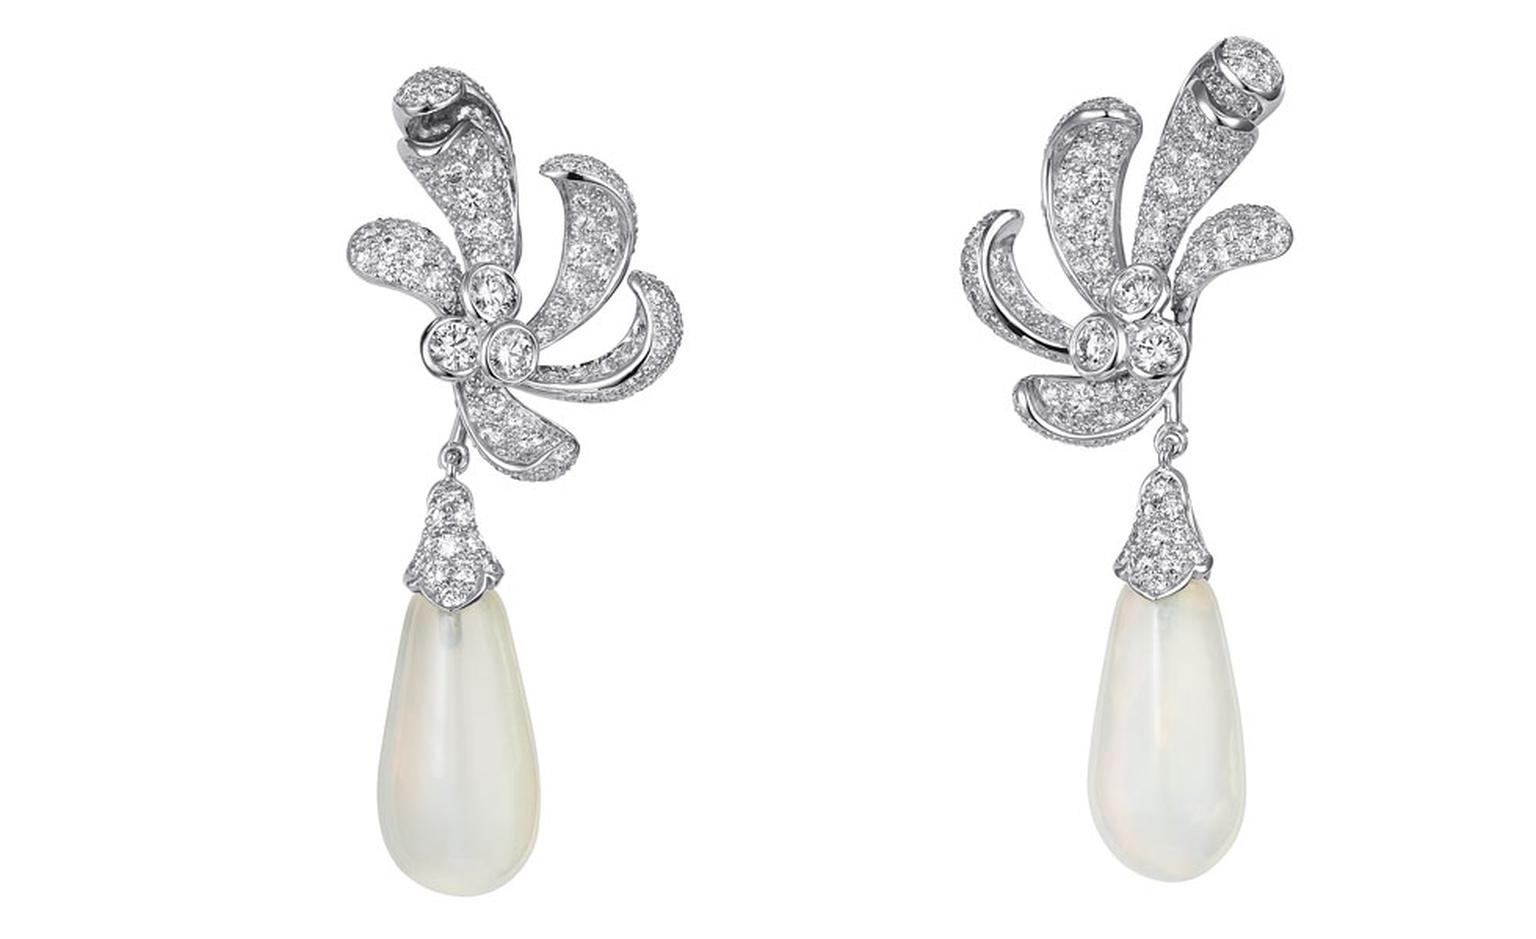 Sortilège de Cartier collection earrings in platinum with diamonds and opals.